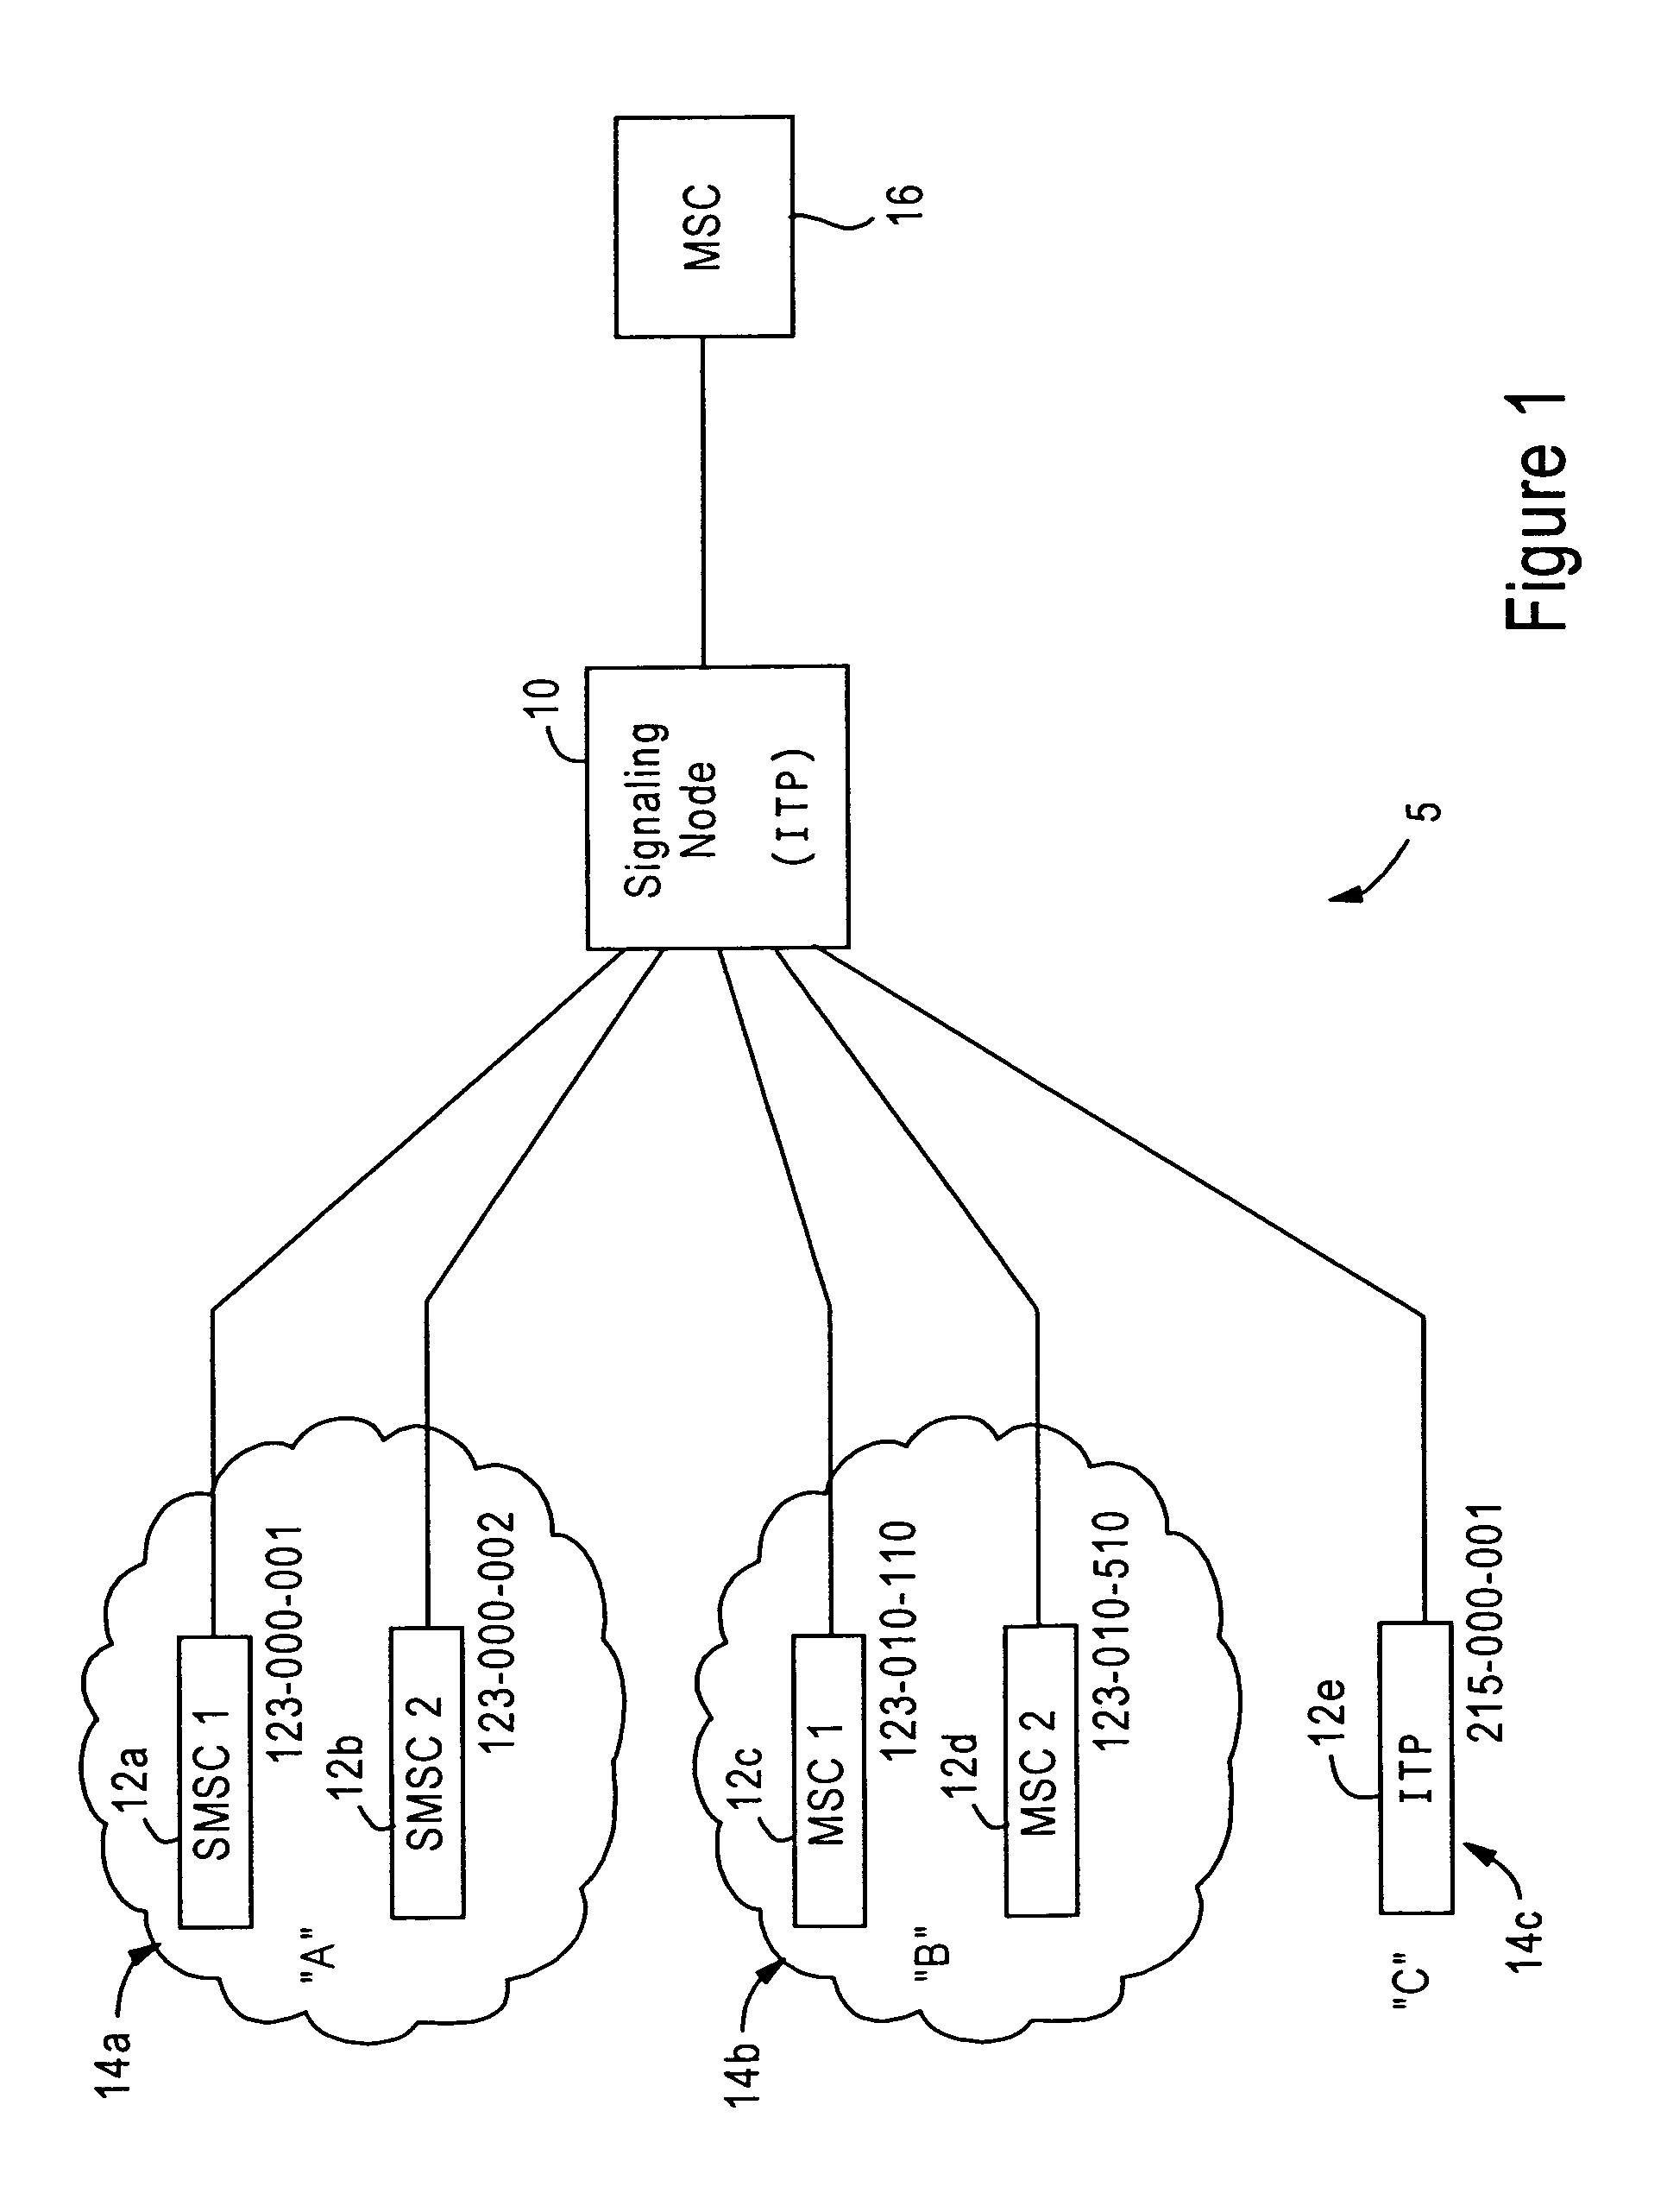 Arrangement for controlling congestion in an SS7 signaling node based on packet classification